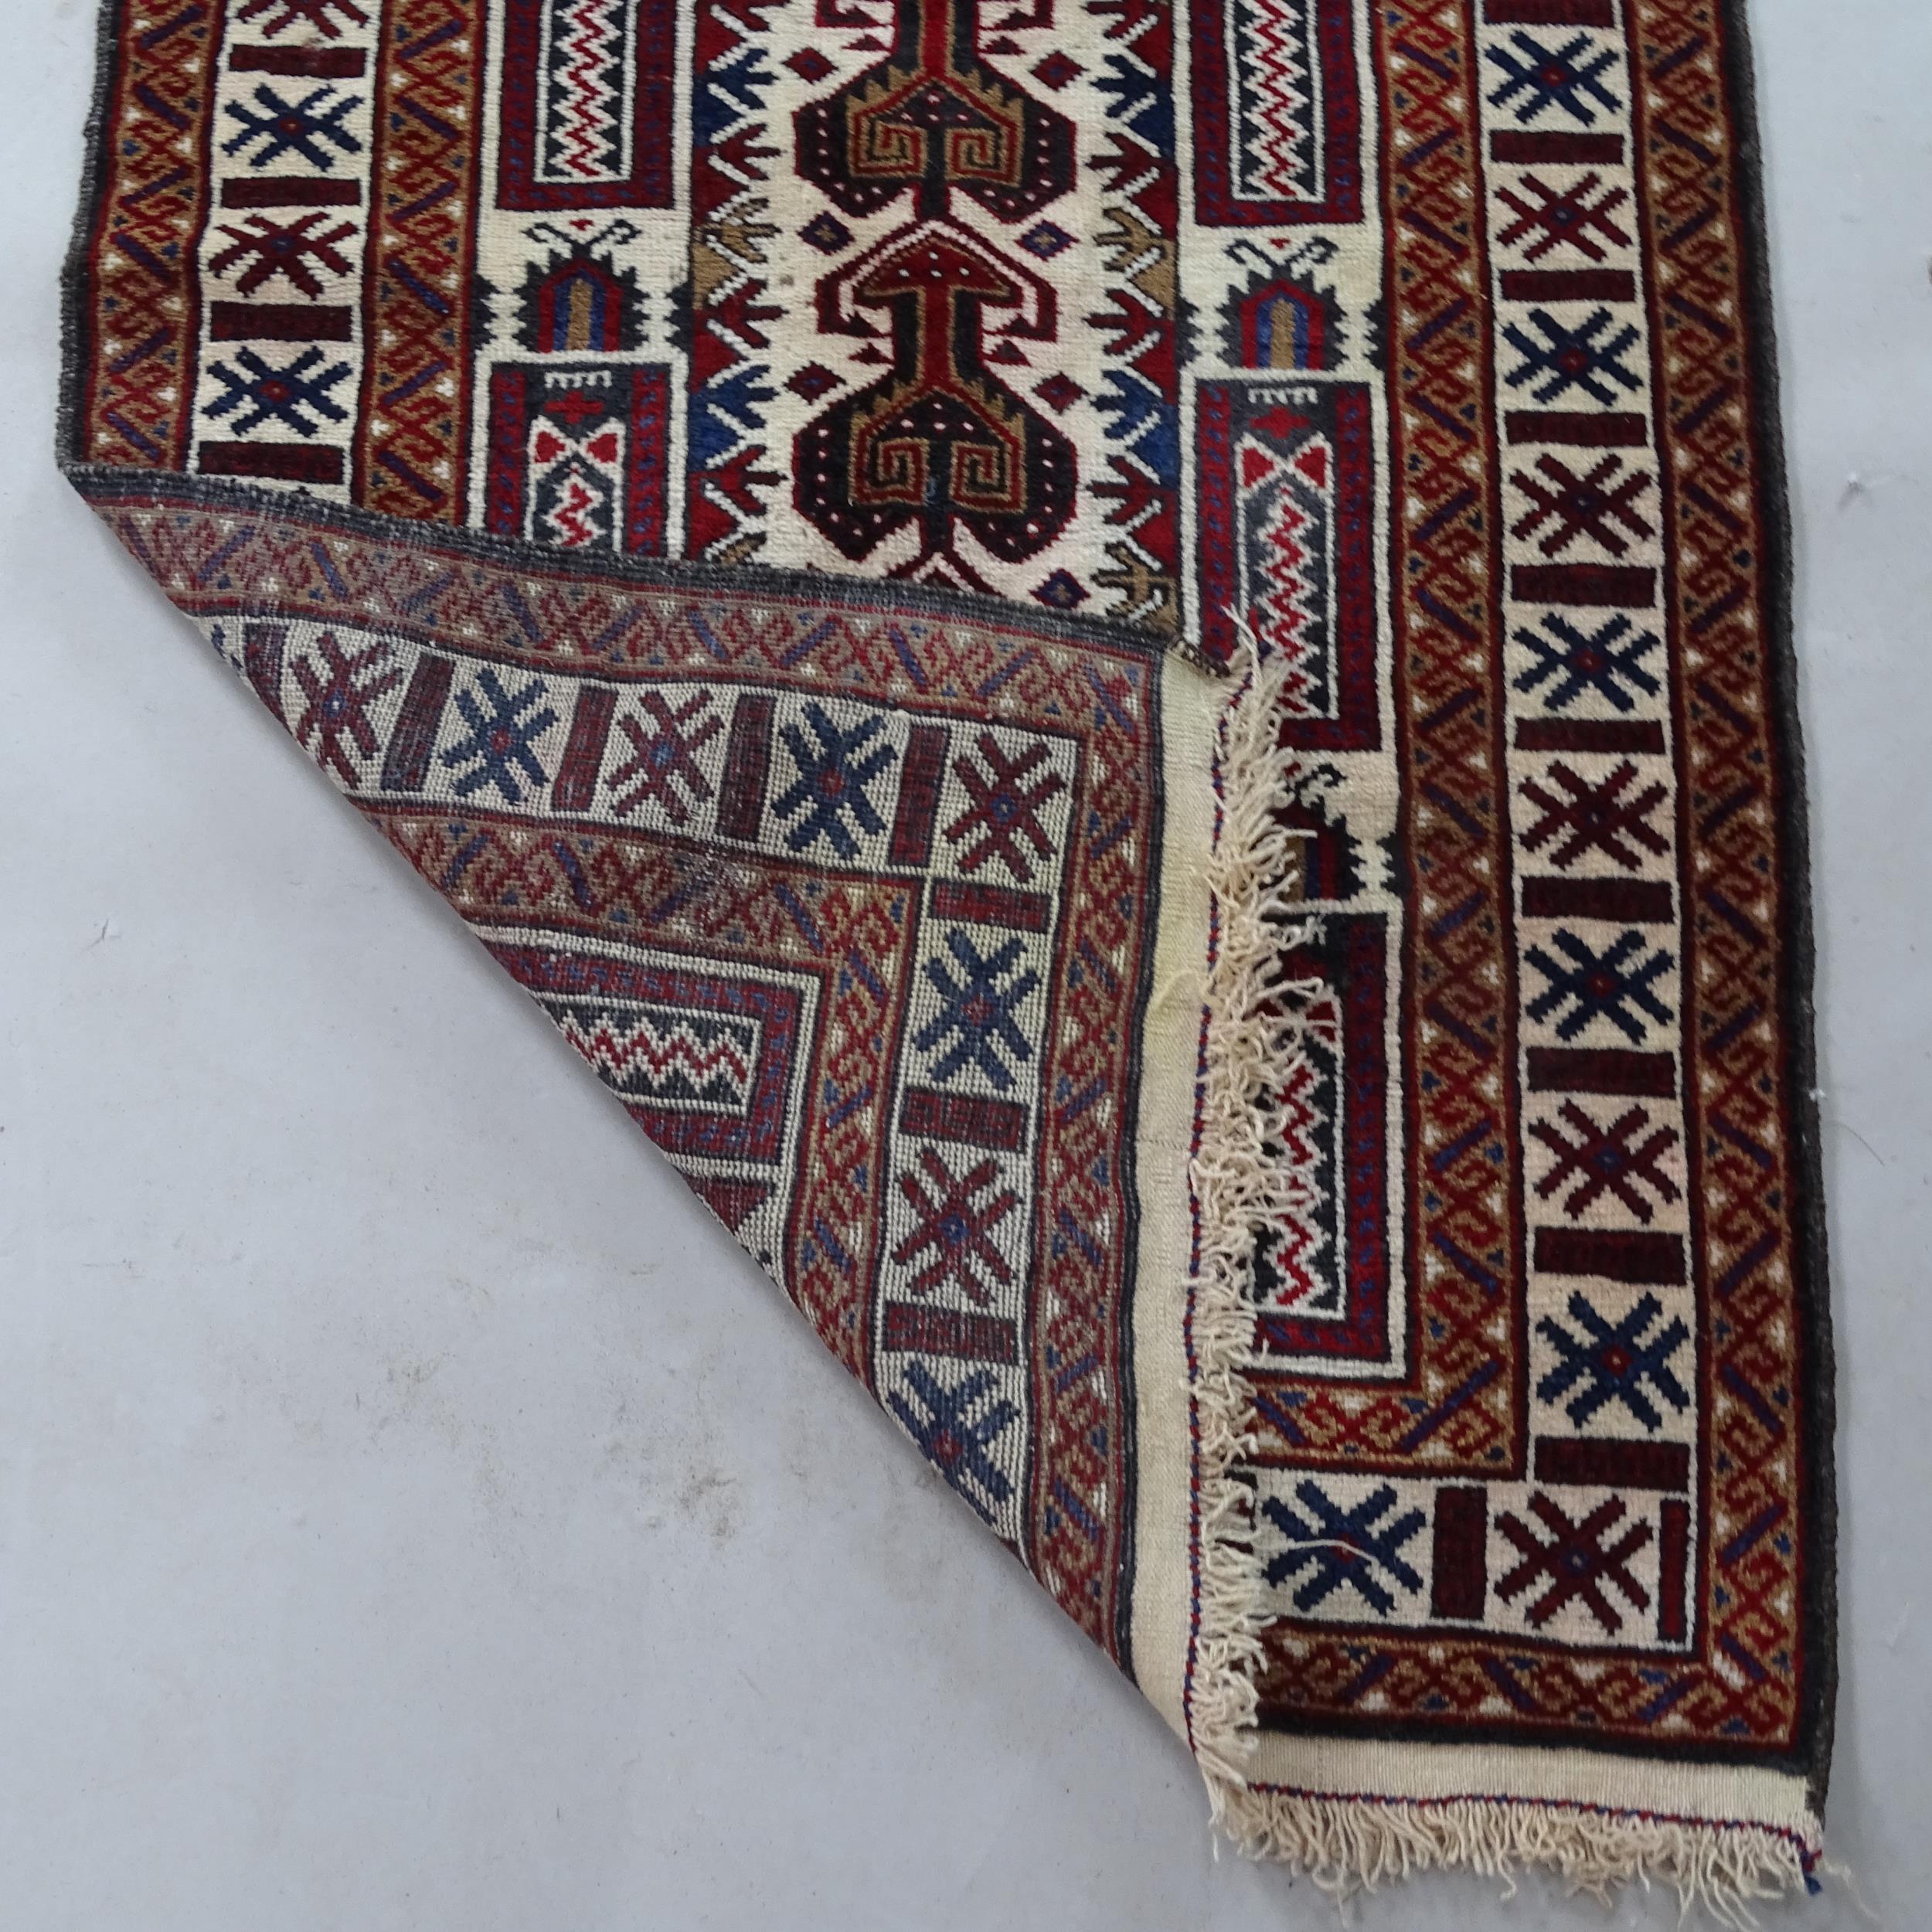 A red and cream ground Afghan prayer rug, 150cm x 83cm - Image 2 of 2